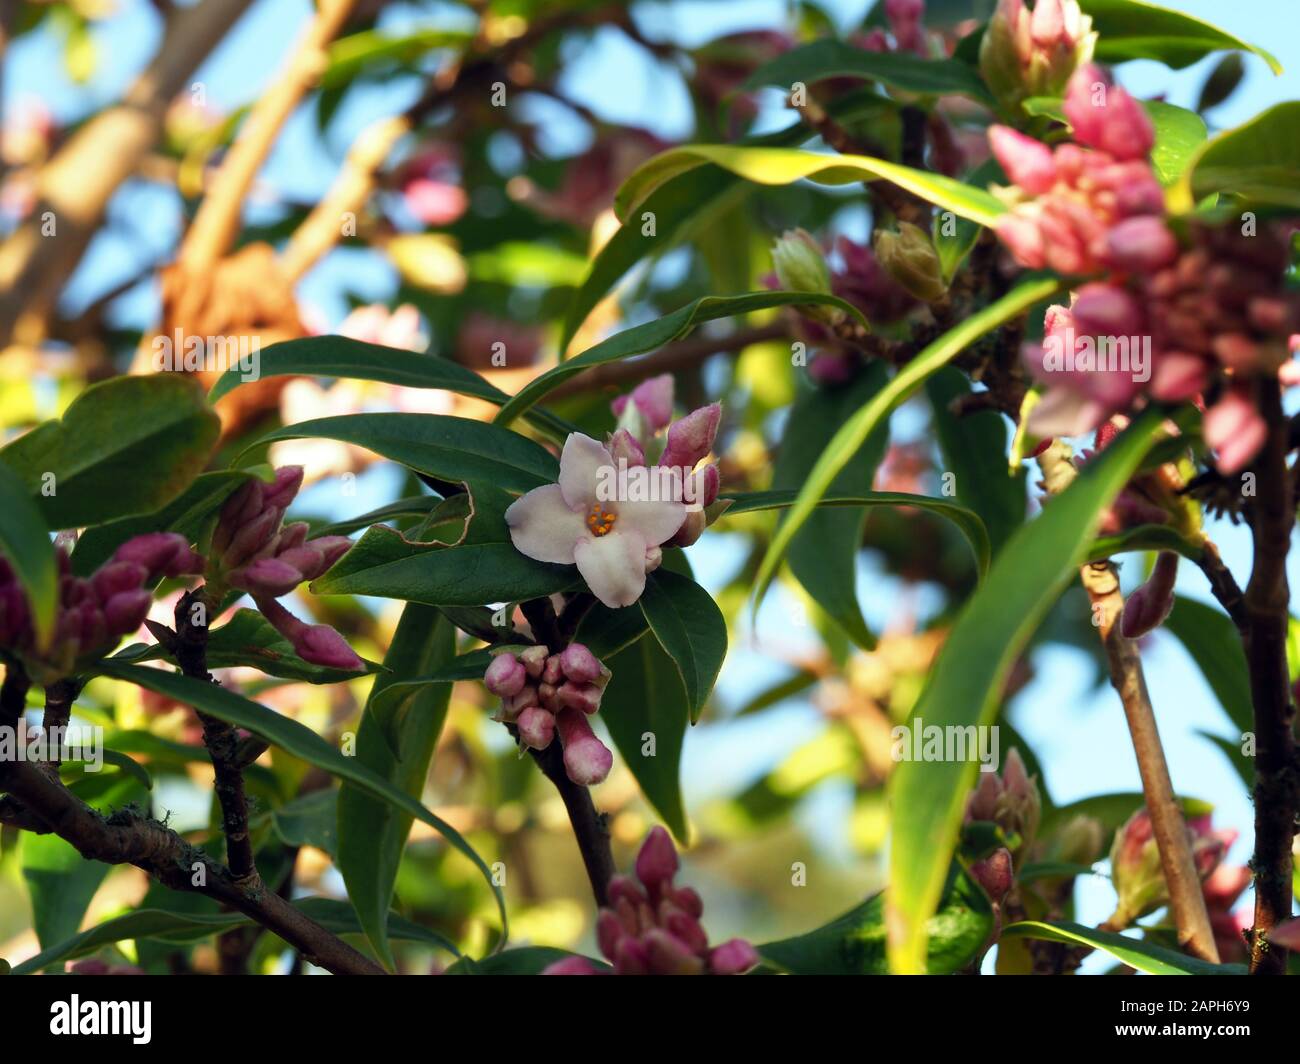 Single open pink flower, pink buds and green leaves on winter daphne bush, Daphne odora Stock Photo